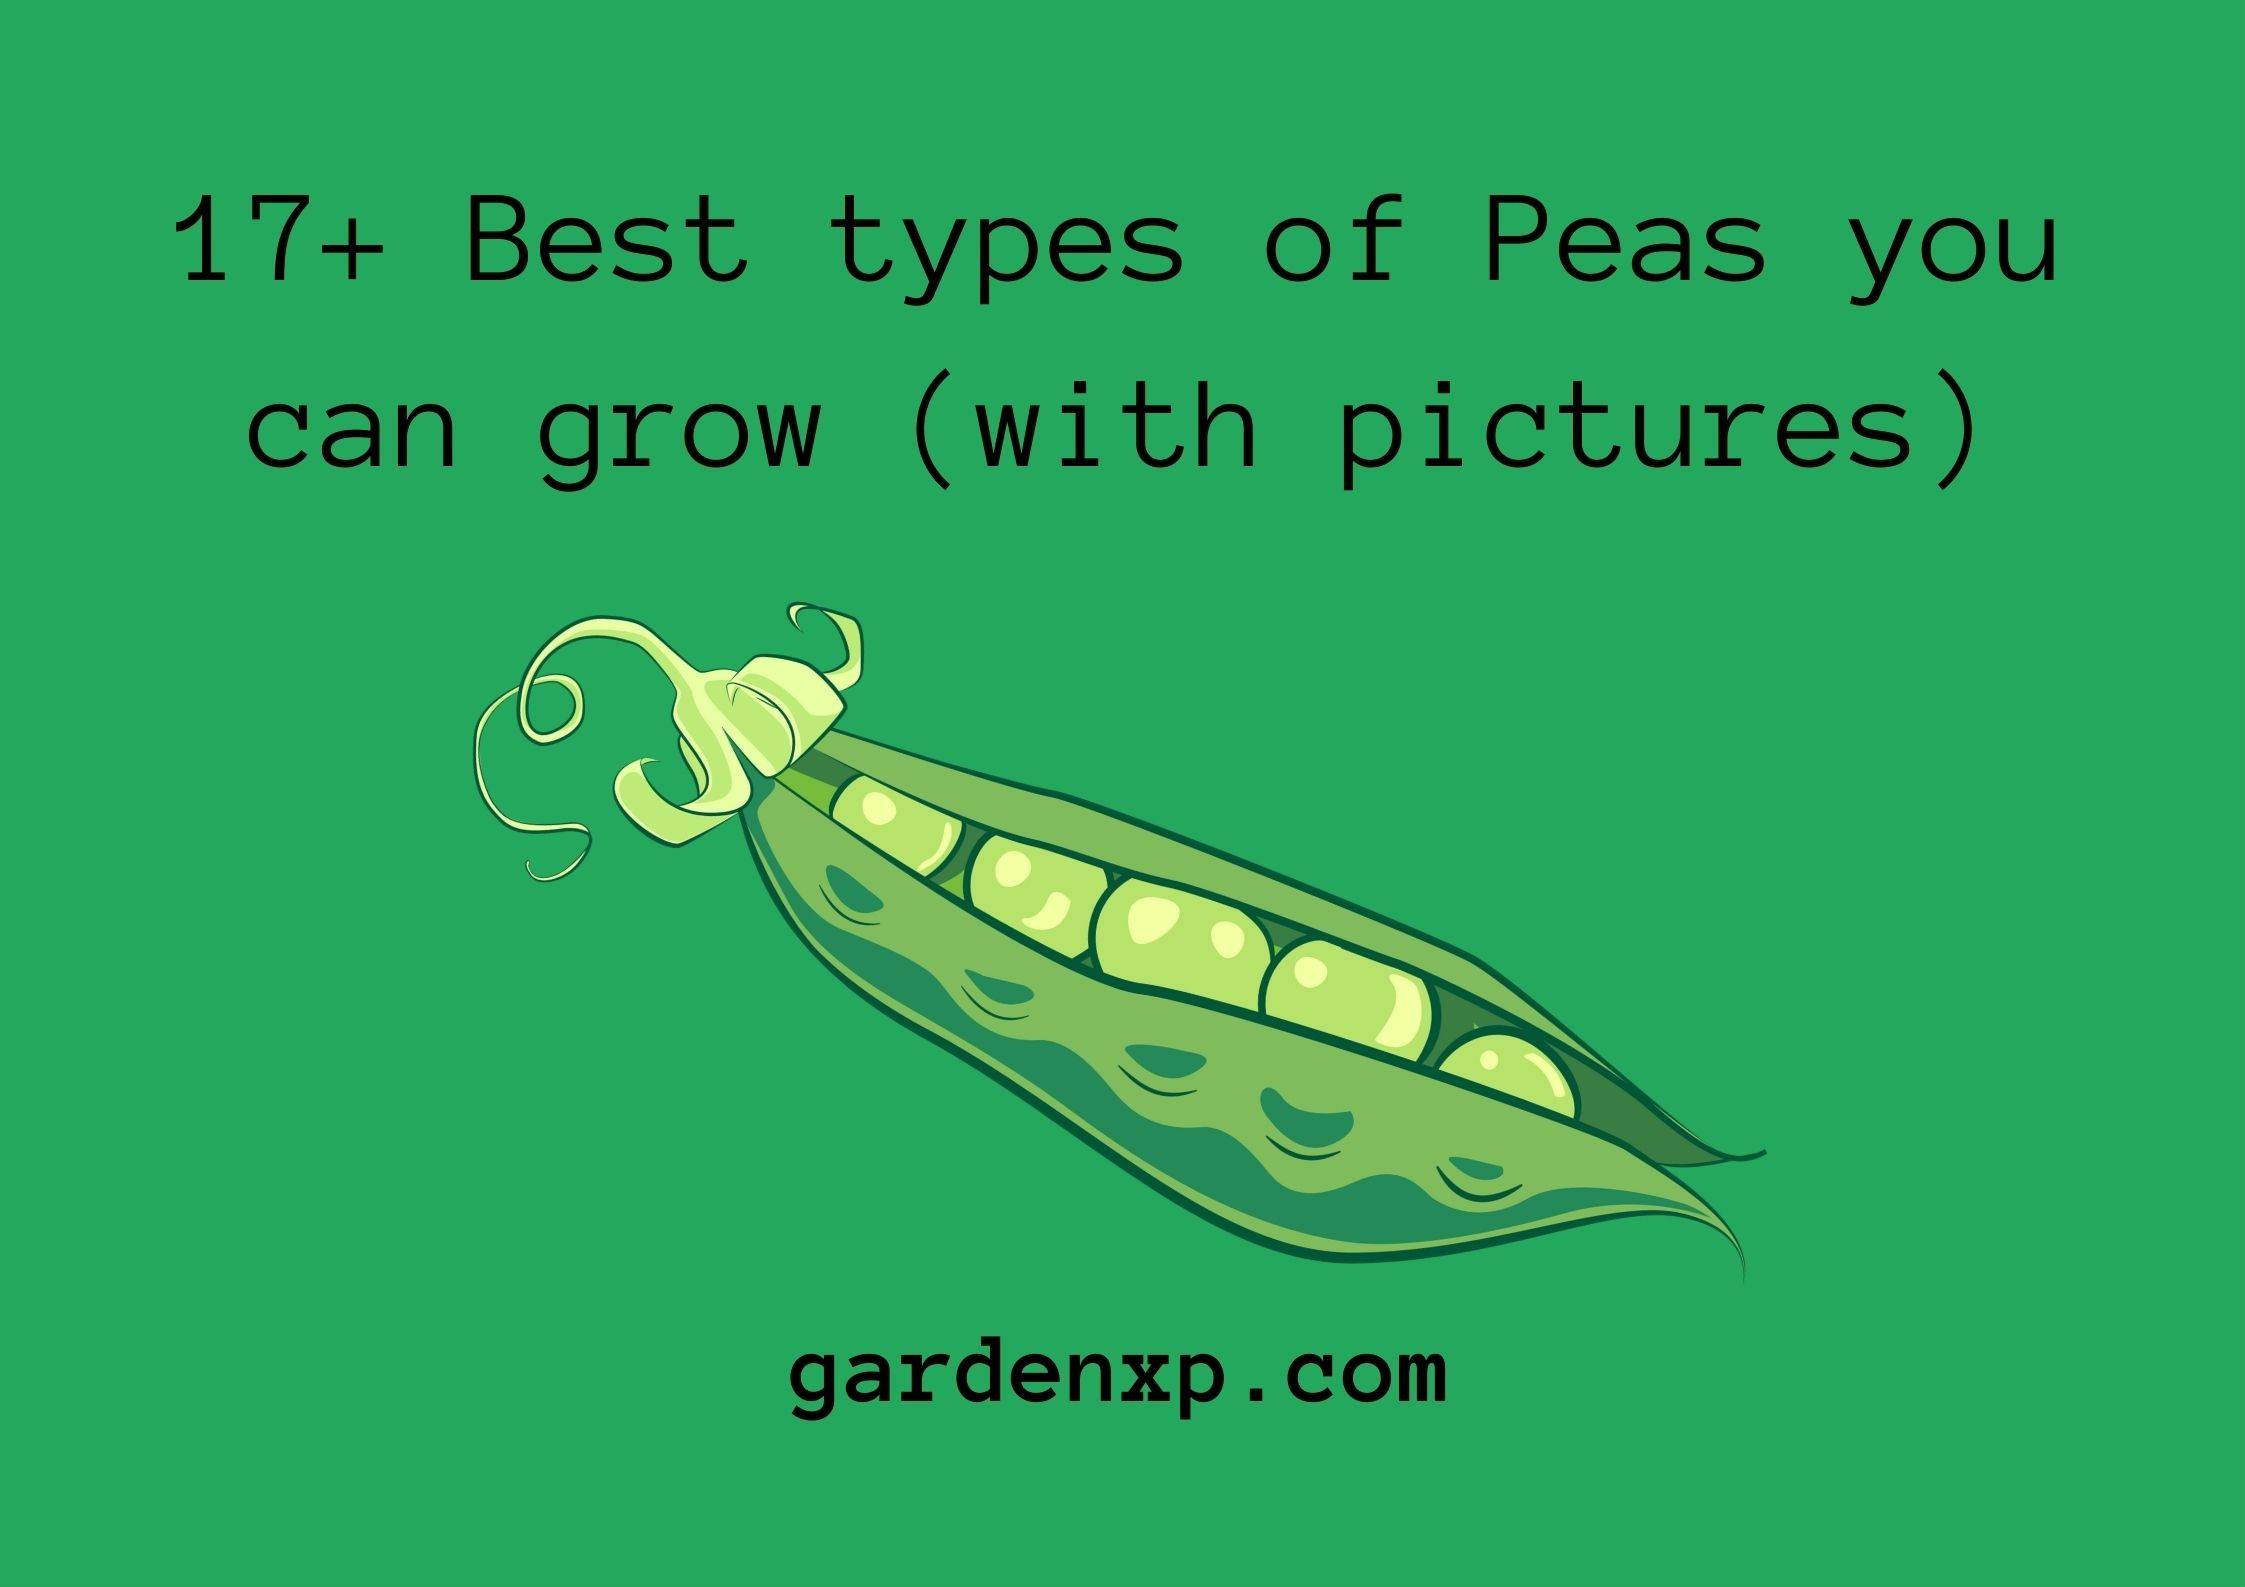 17+ Best types of Peas you can grow (with pictures)